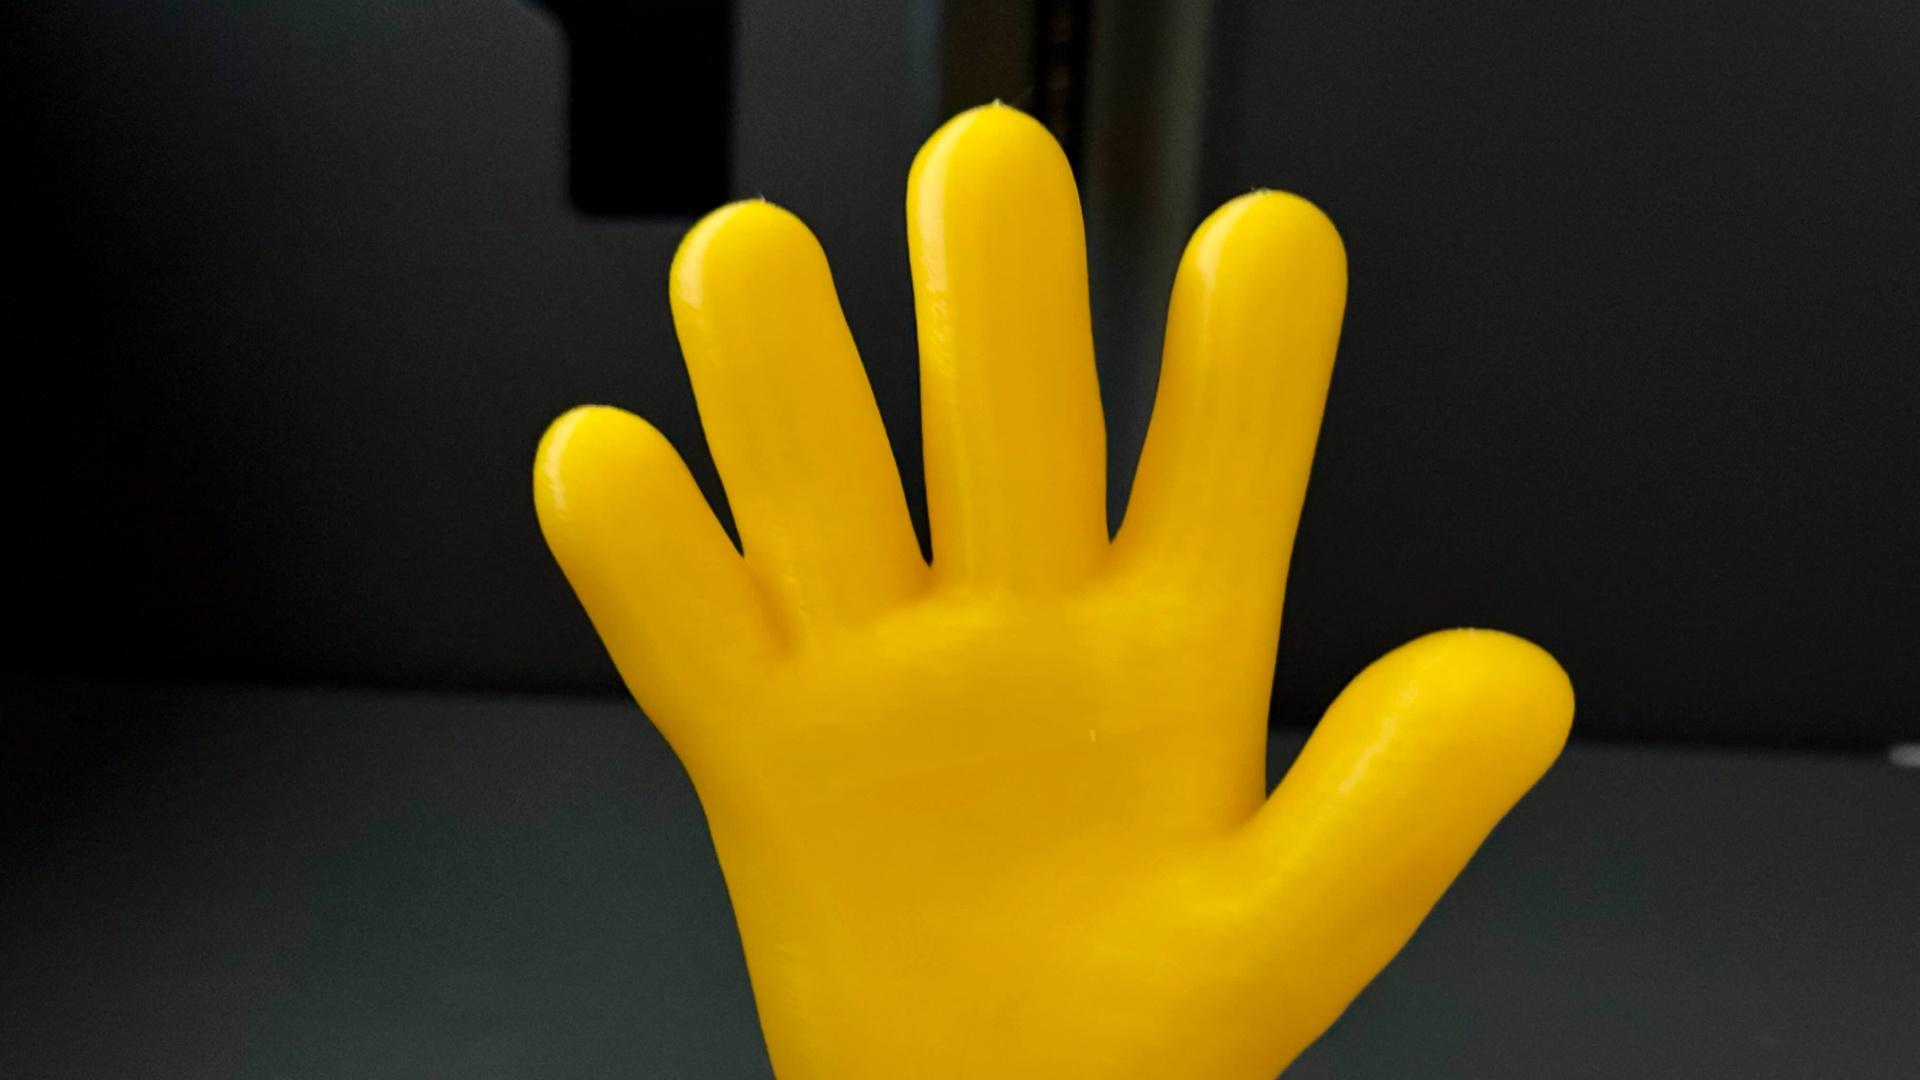 EMOJI HAND 🖐️ HAND WITH FINGERS SPLAYED 3d model